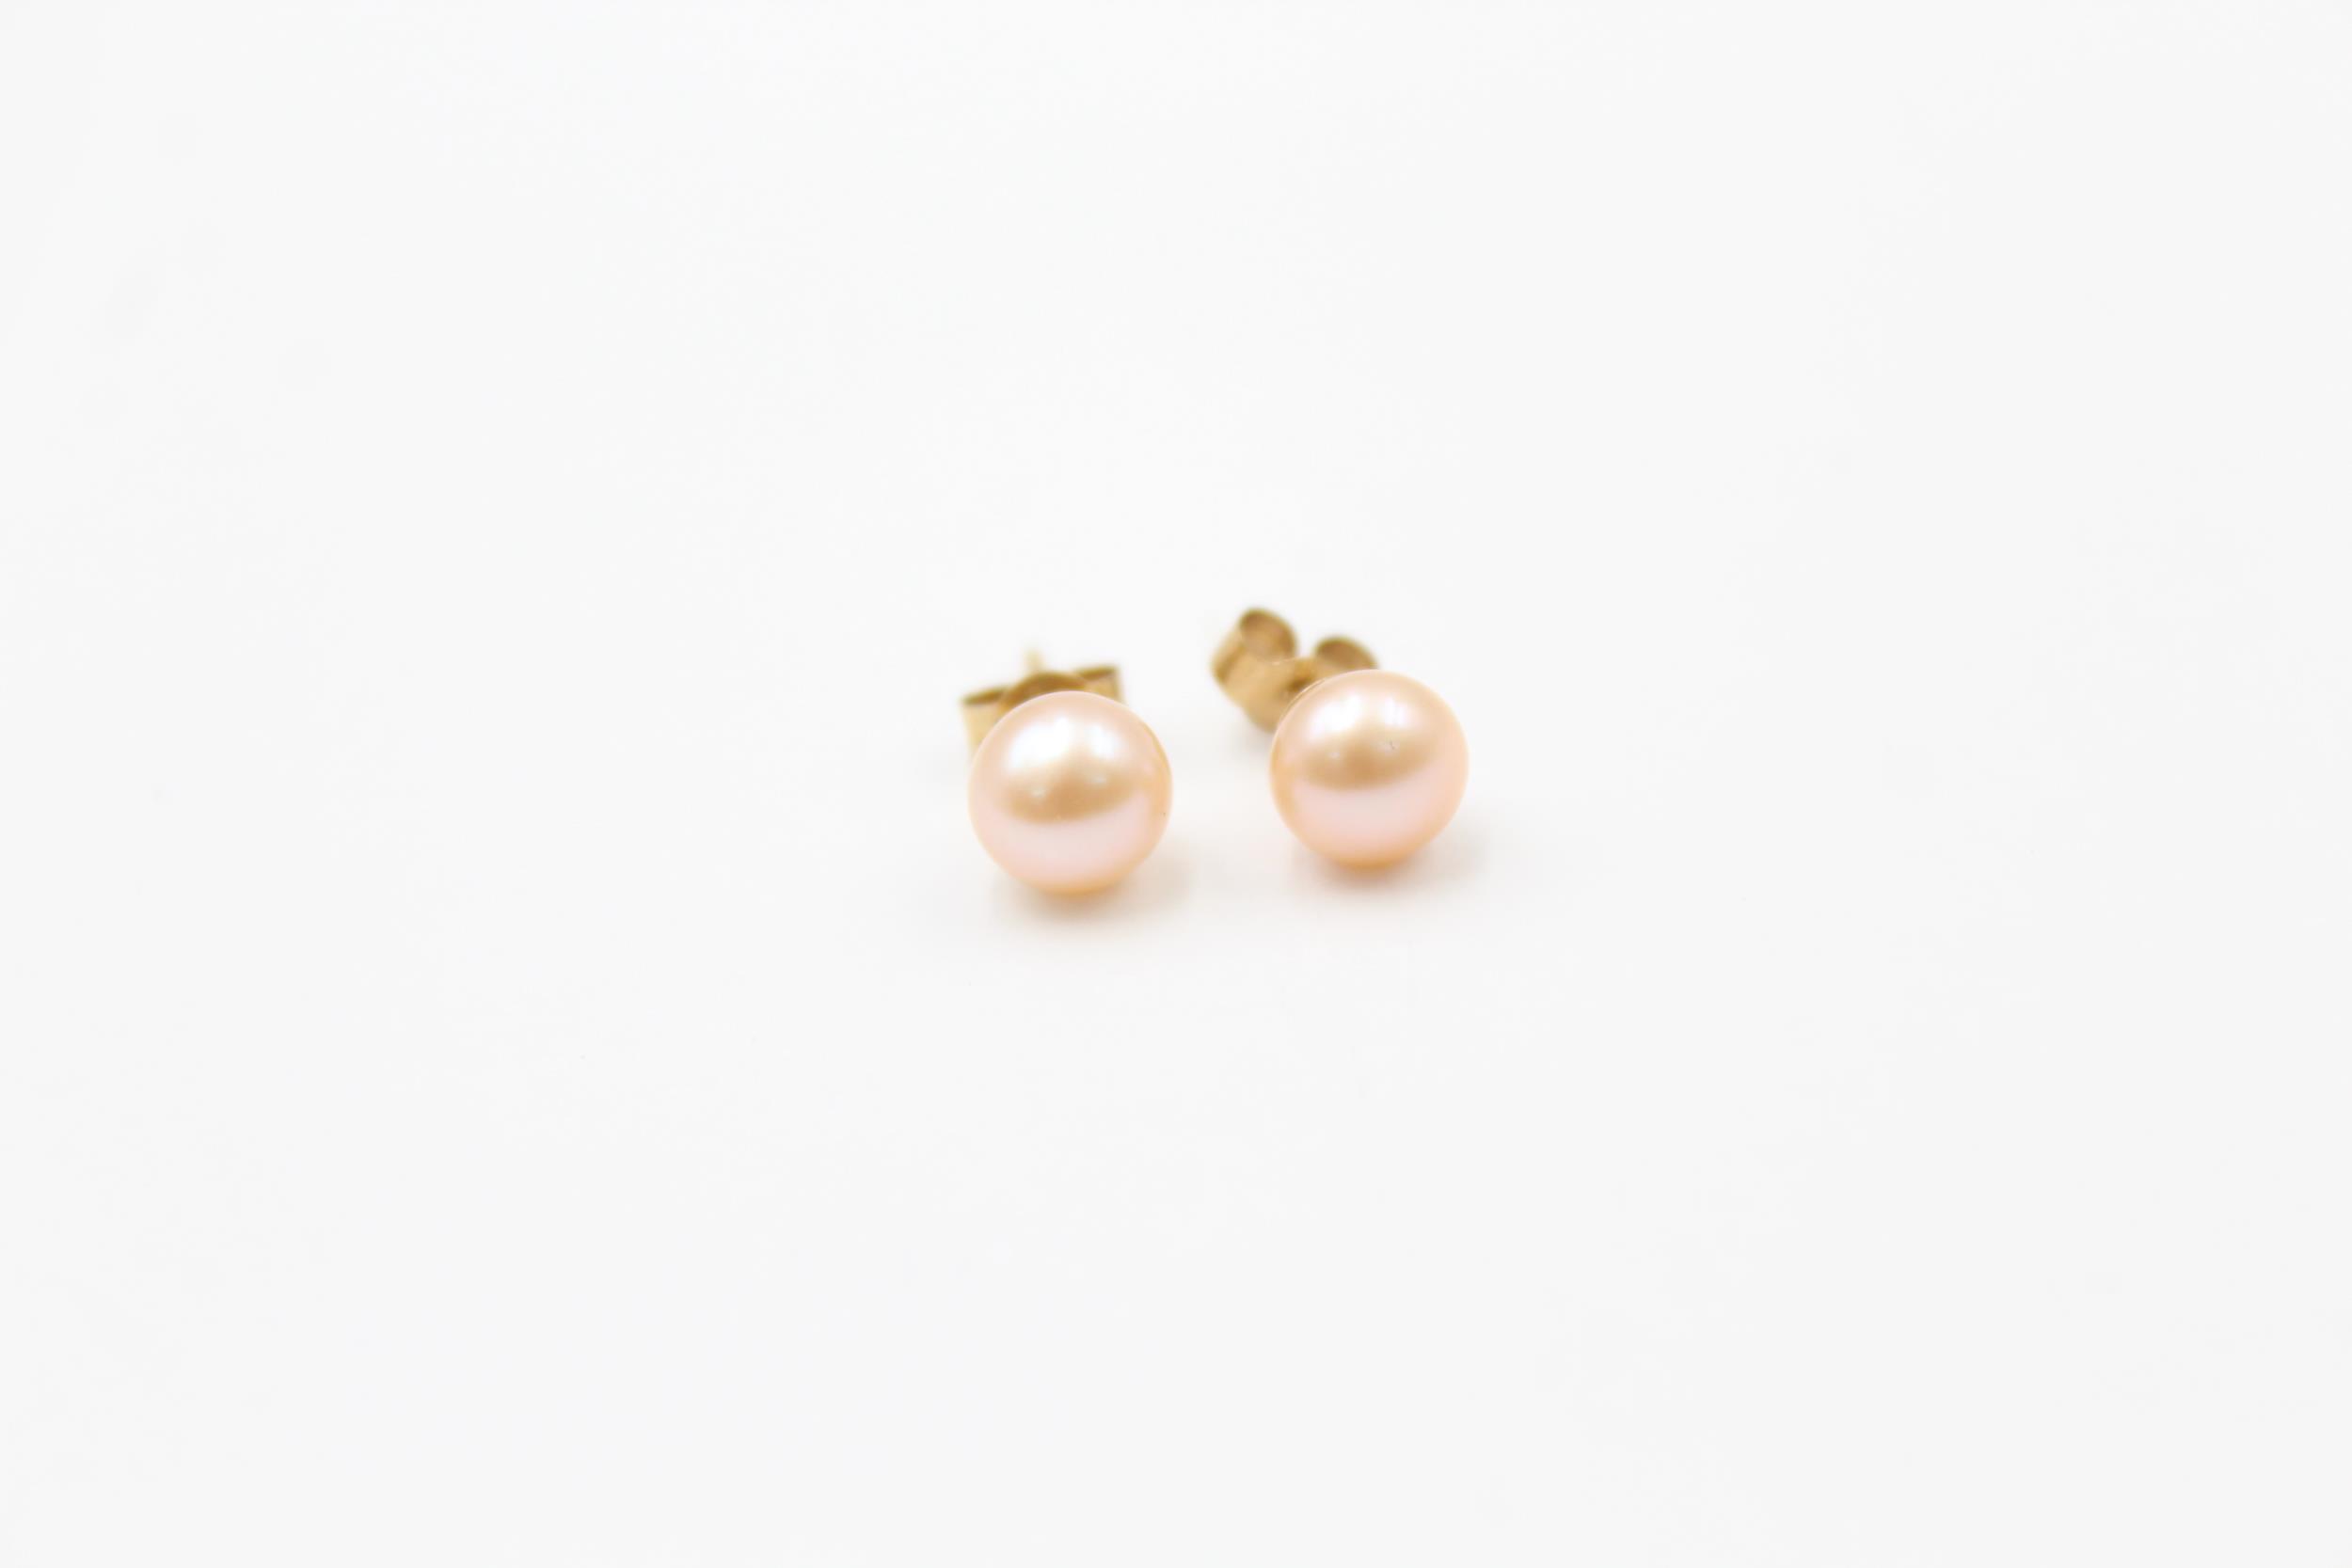 3 x 9ct gold paired pearl stud earrings (4.6g) - Image 2 of 6